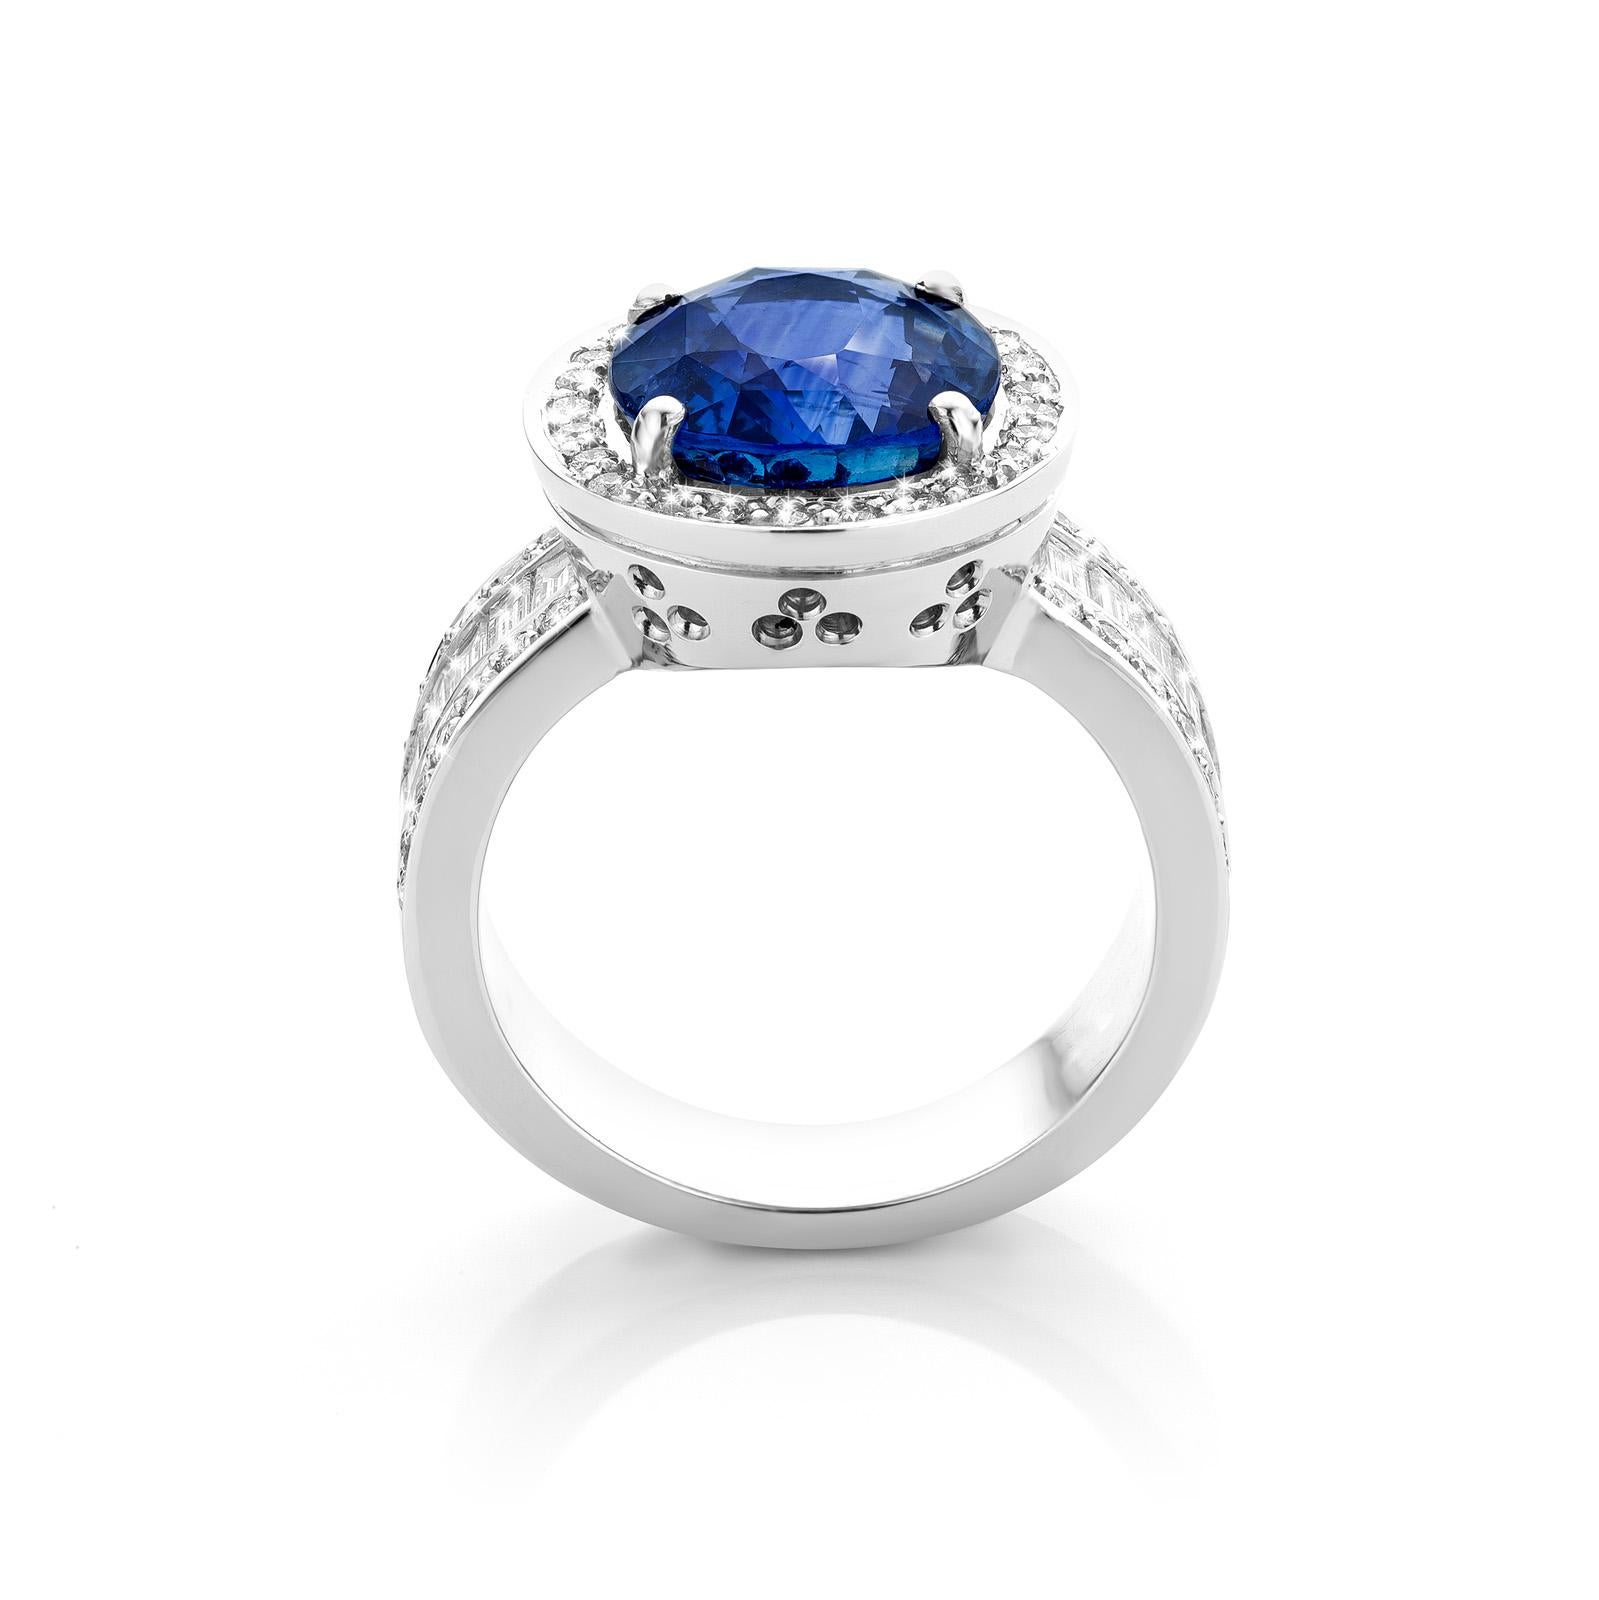 Oval Cut 5.53 Carat Ceylon Sapphire Cluster Diamond White Gold Cocktail Engagement Ring For Sale